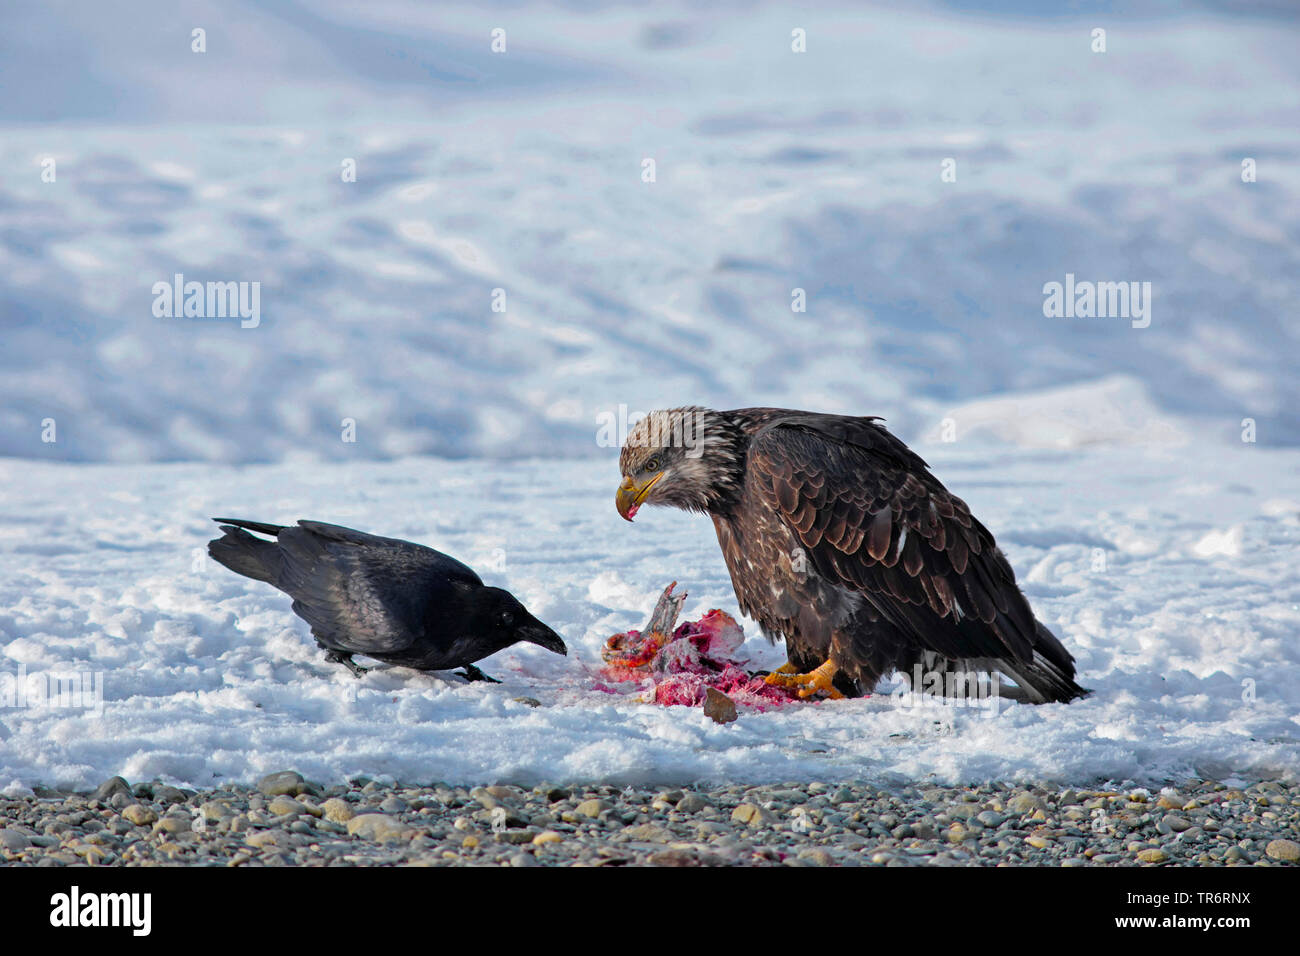 American bald eagle (Haliaeetus leucocephalus), sitting in snow at lure, crow trying to steal, USA, Alaska, Haines Alaska Chilkoot River Stock Photo